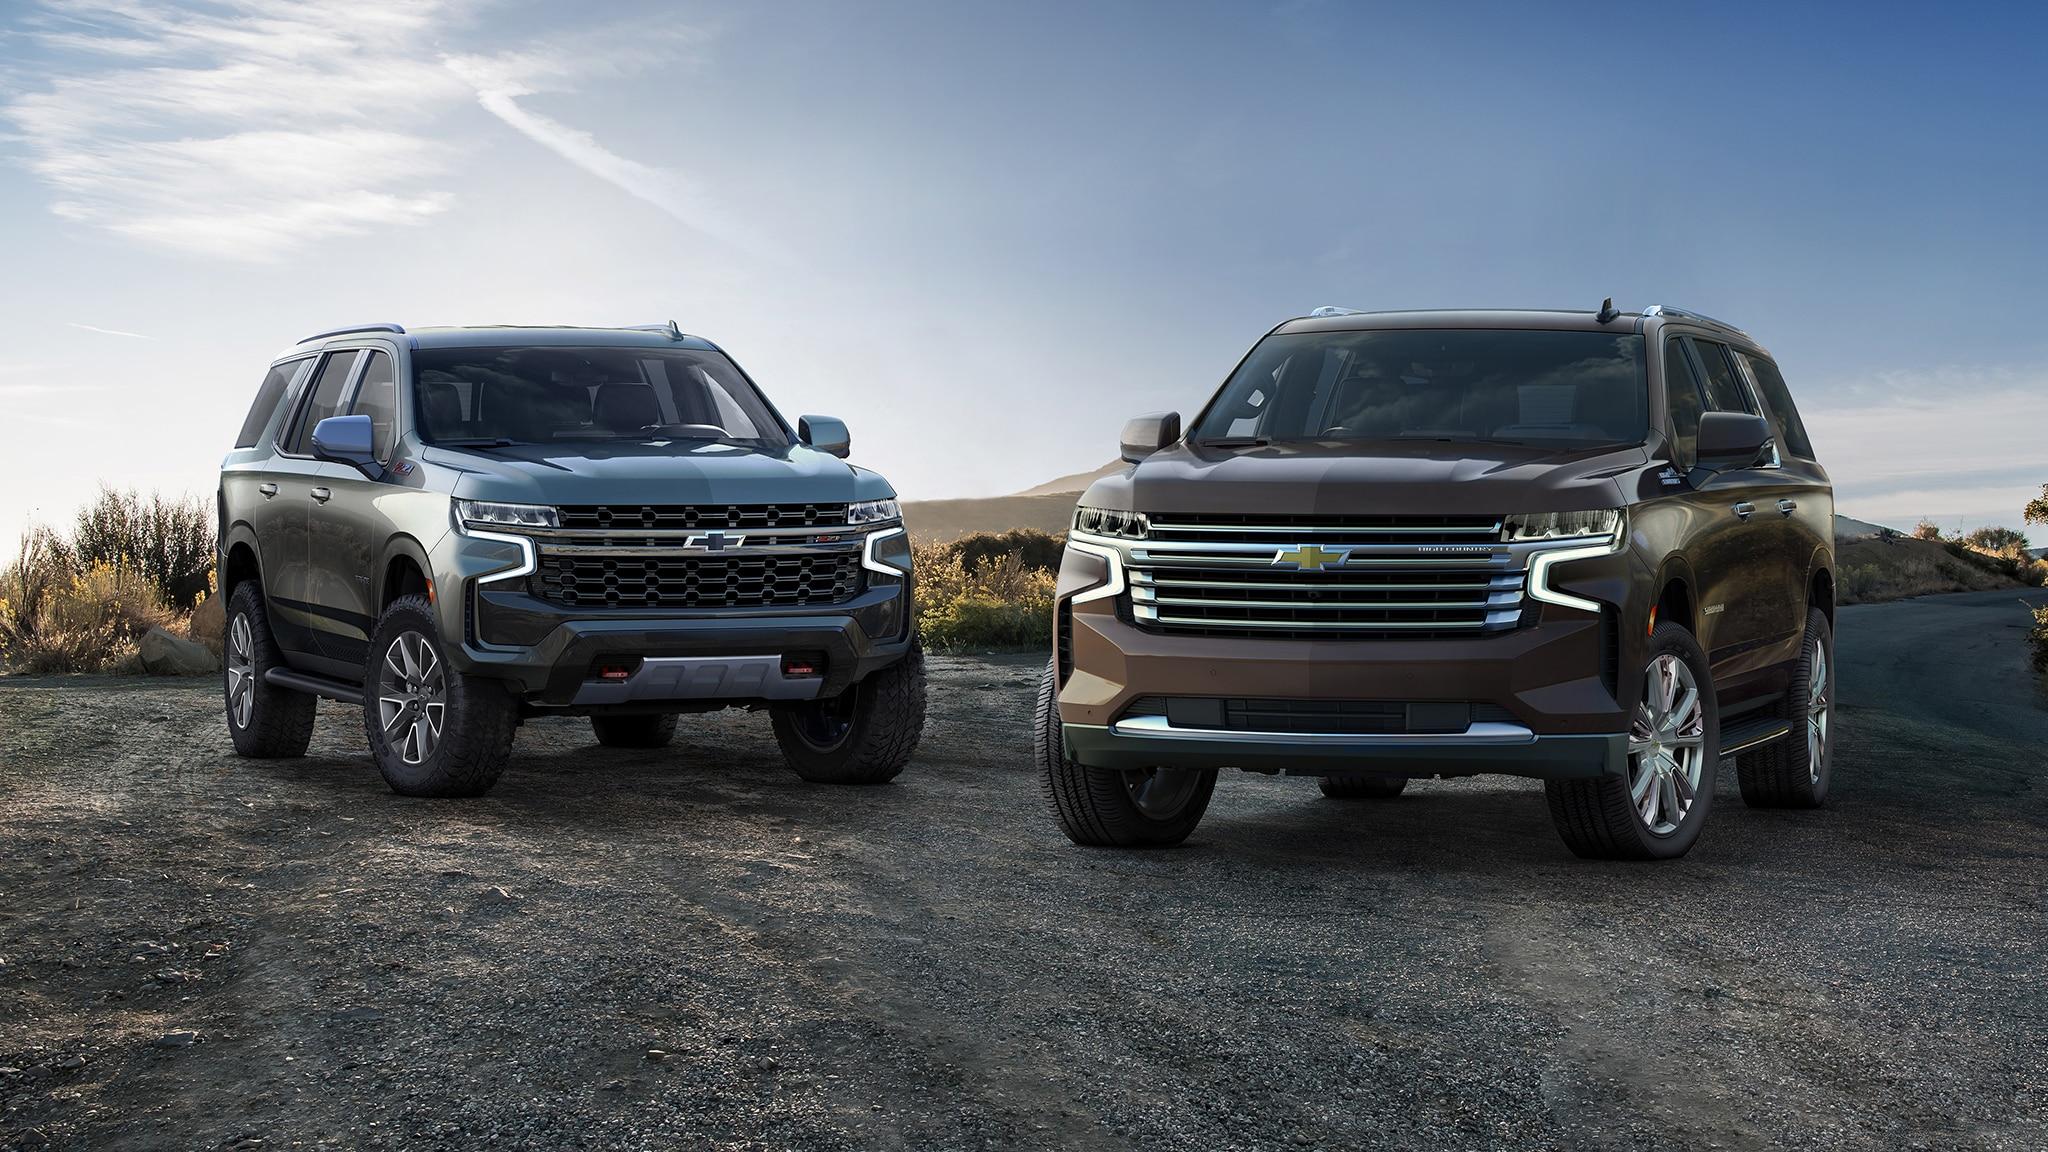 Chevy Tahoe and Suburban: Photo, Specs + More